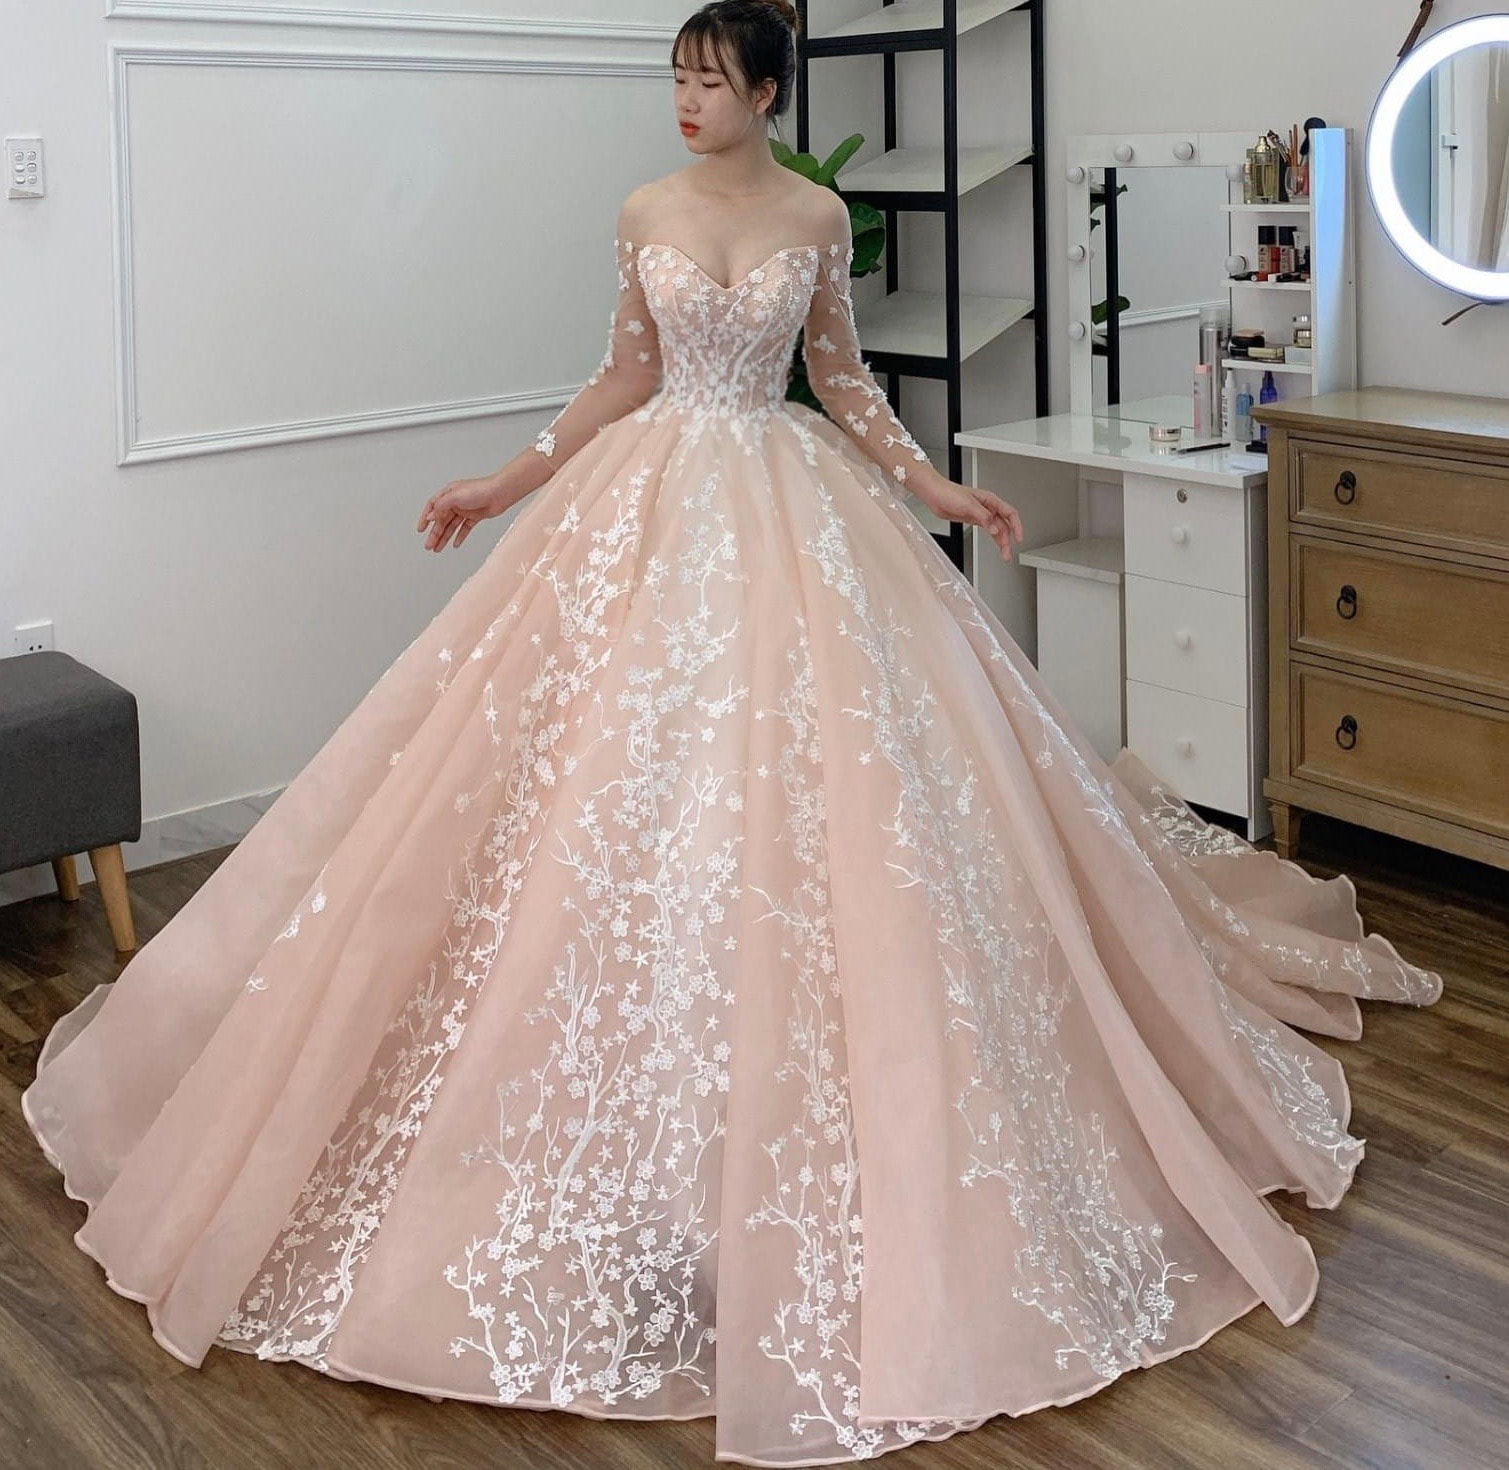 Great Pink Ball Gown Wedding Dress Check it out now | romanticwedding2